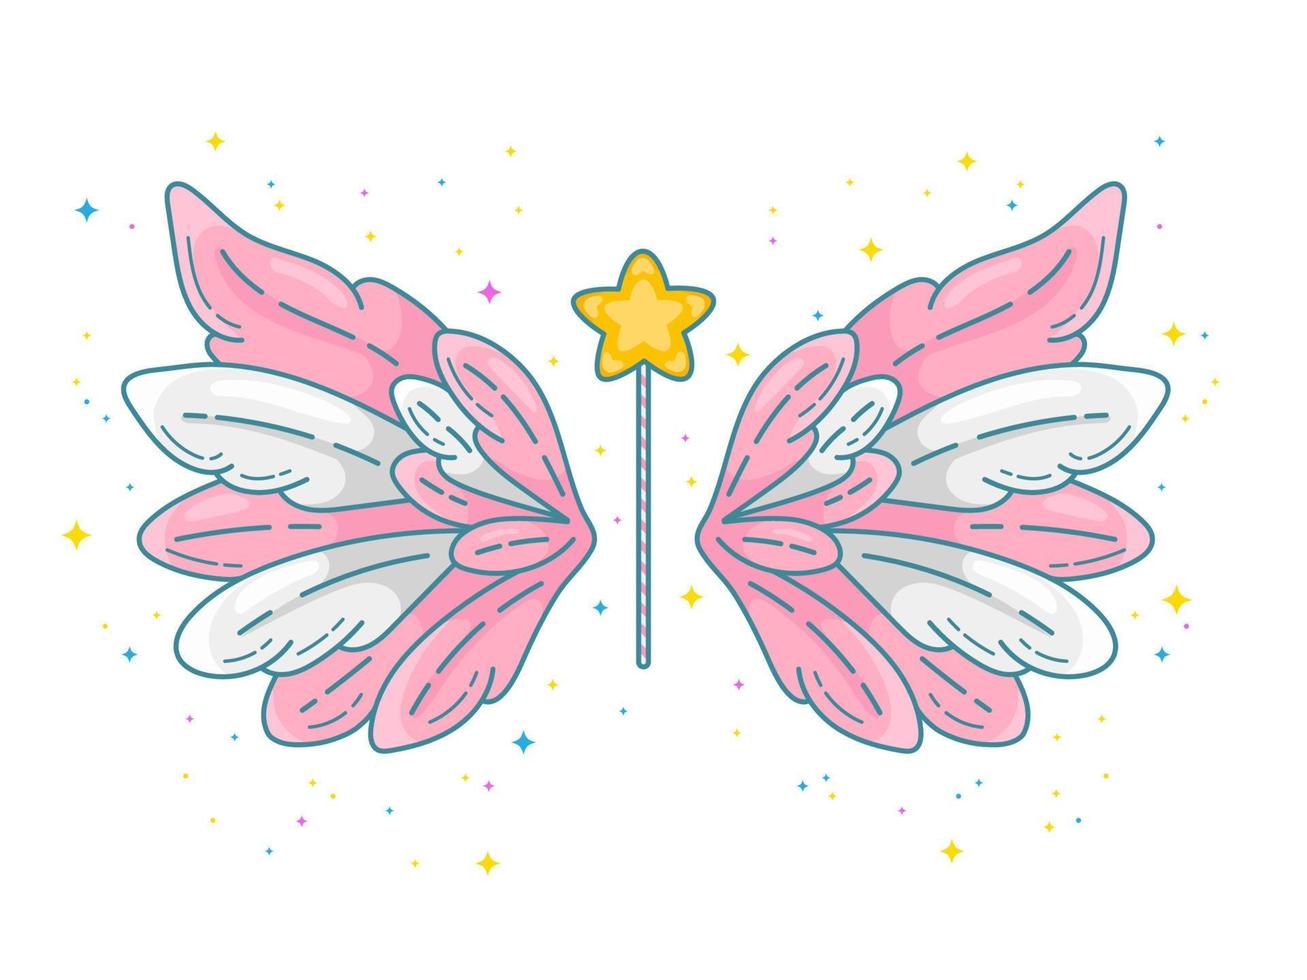 Magic wings in cute little princess style, pink and grey palette. Wide spread angel wings and magic wand with star dust. Vector illustration